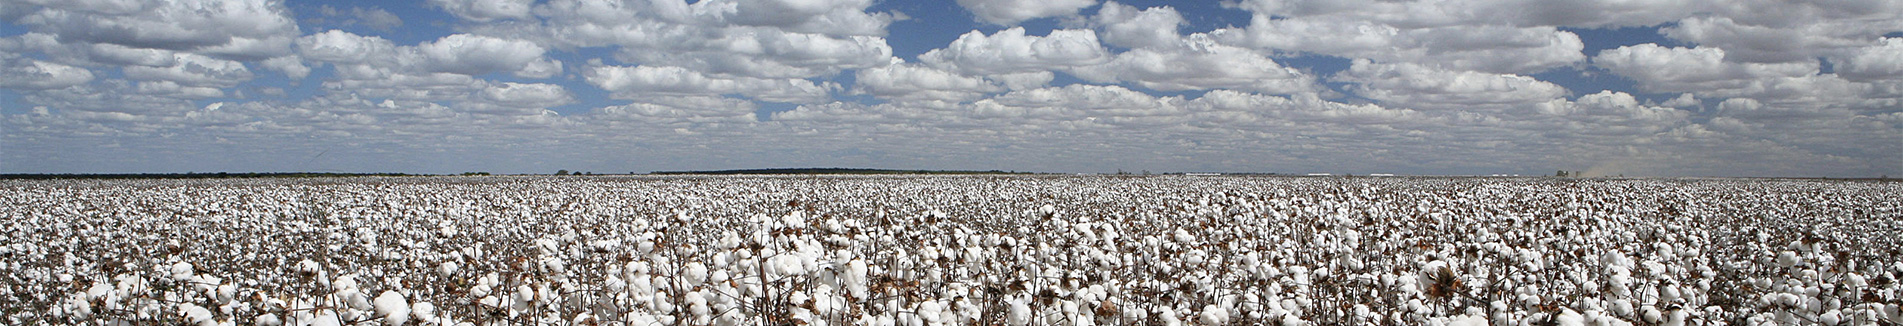 stock-photo-cotton-plantation-with-blue-sky-and-white-clouds-485087506_banner.jpg